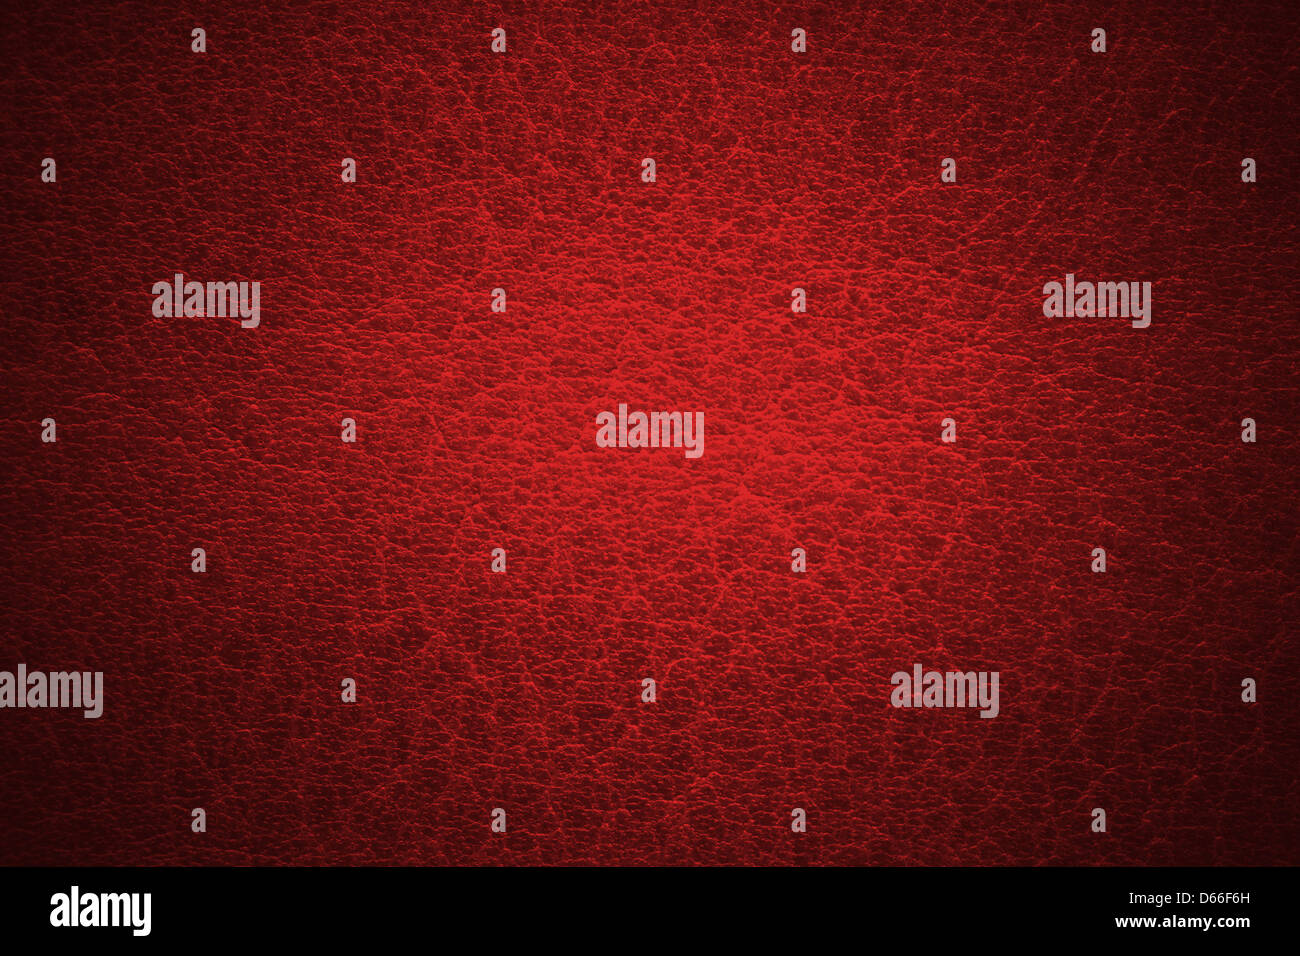 red leather background or rough pattern organic texture Stock Photo